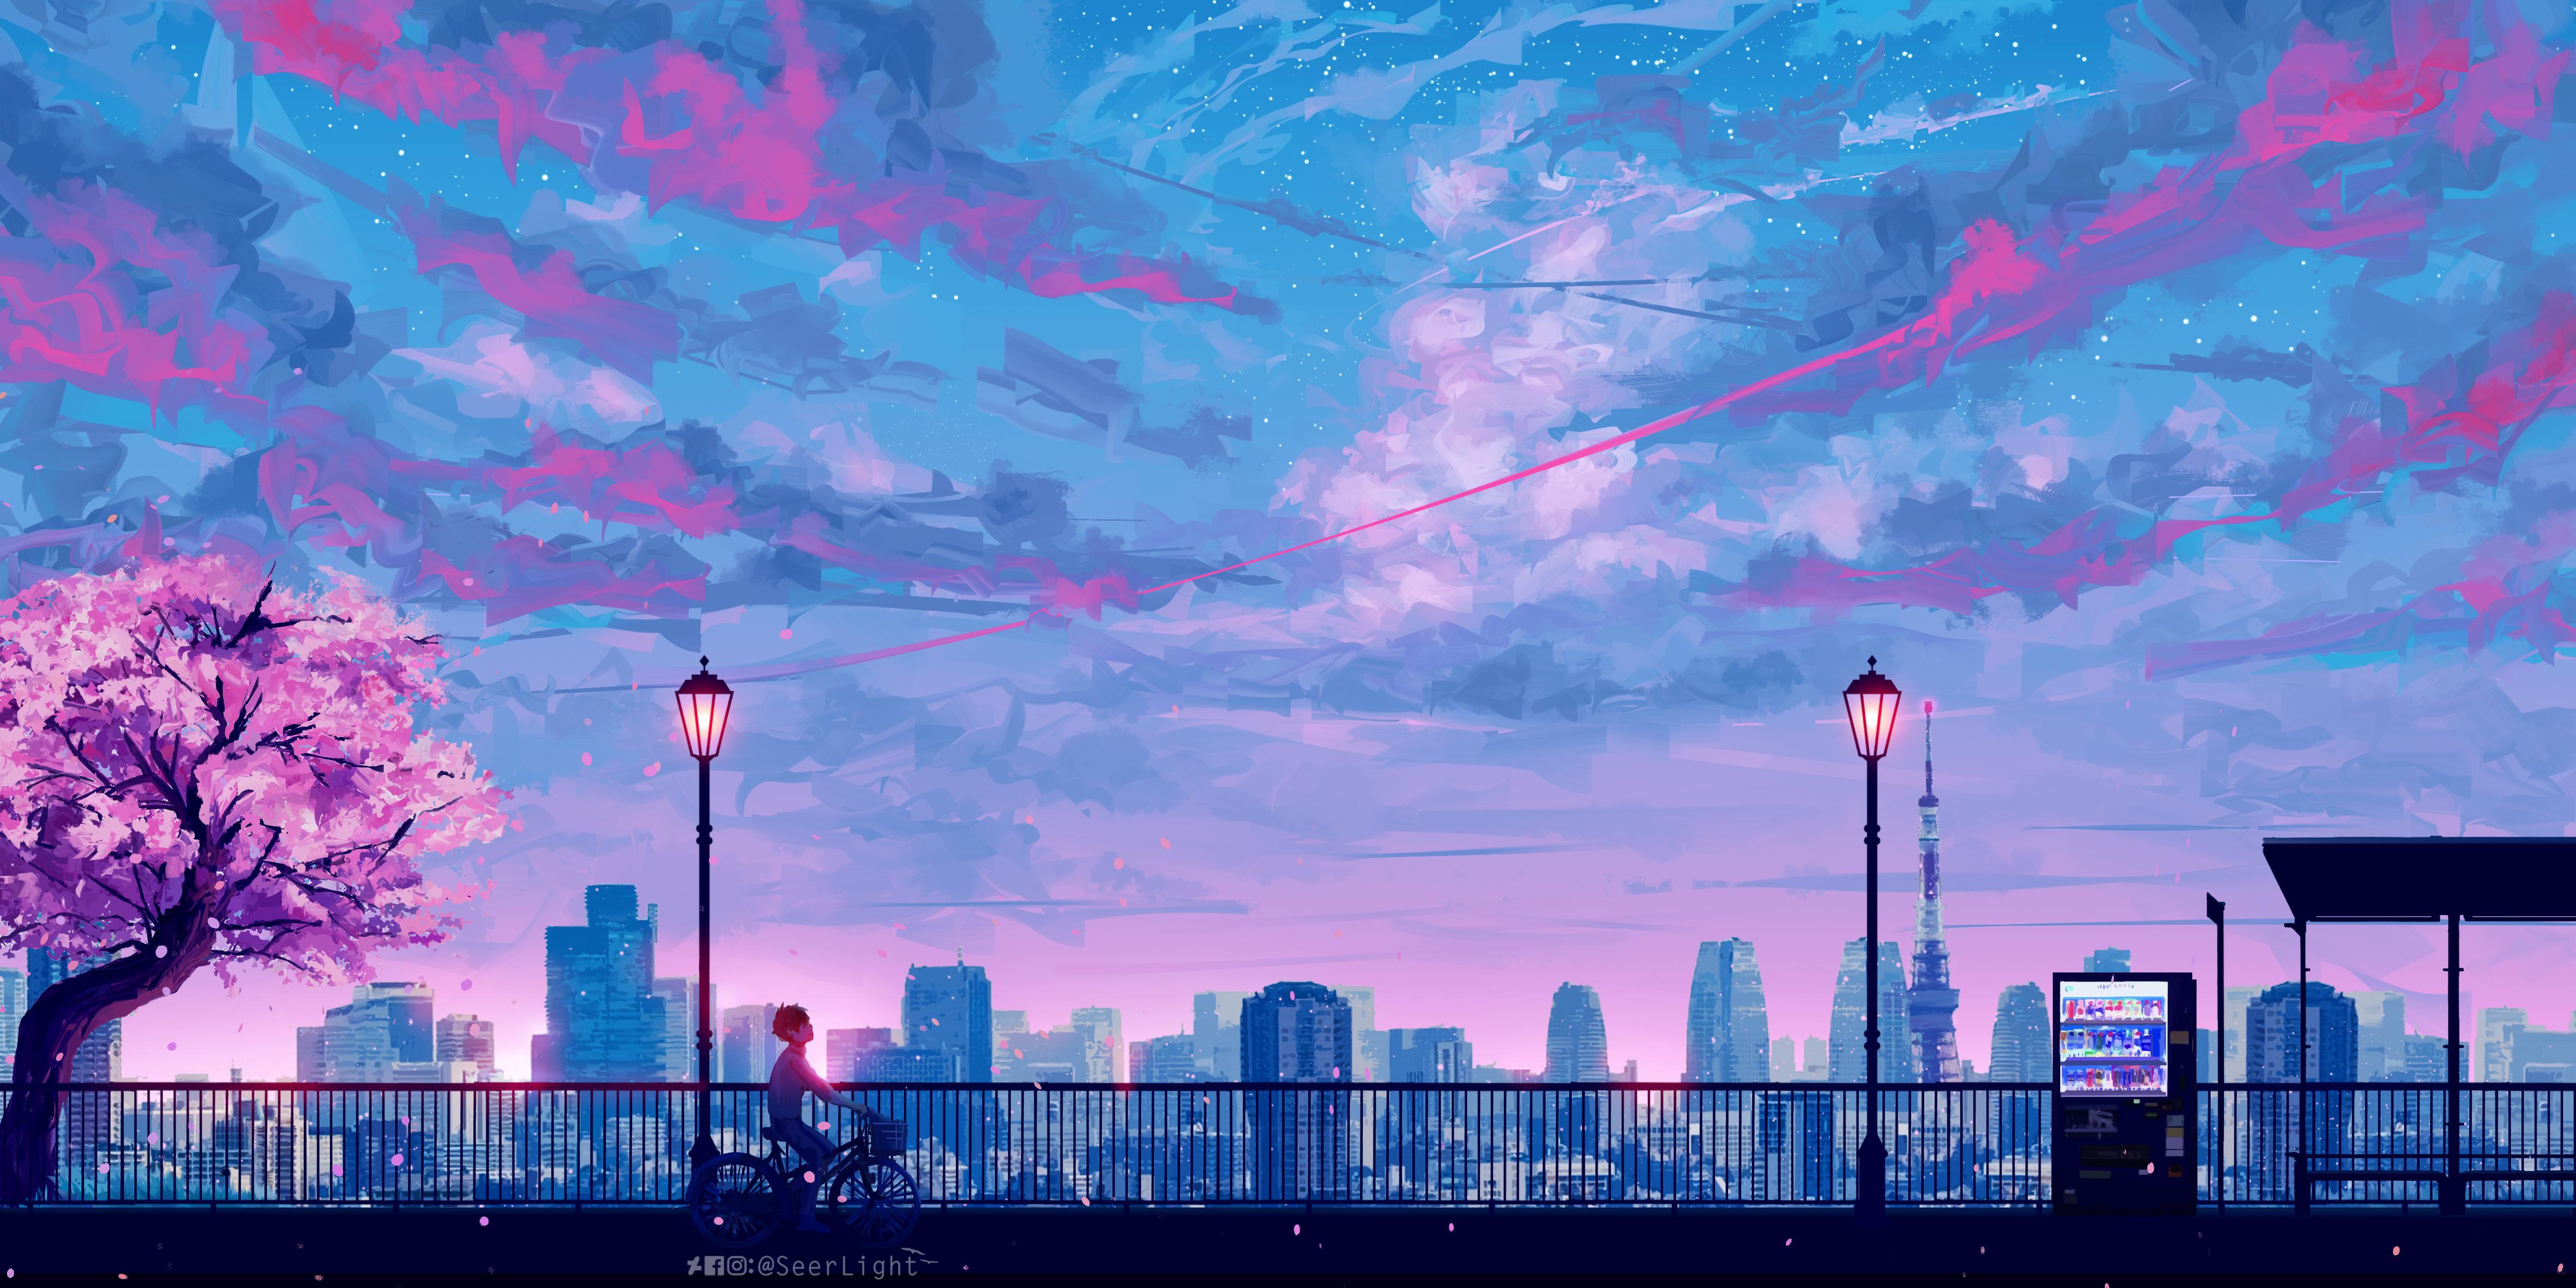 Anime Aesthetic City Wallpapers Wallpaper Cave Collection by 𝐀 ❤ • last updated 3 days ago. anime aesthetic city wallpapers